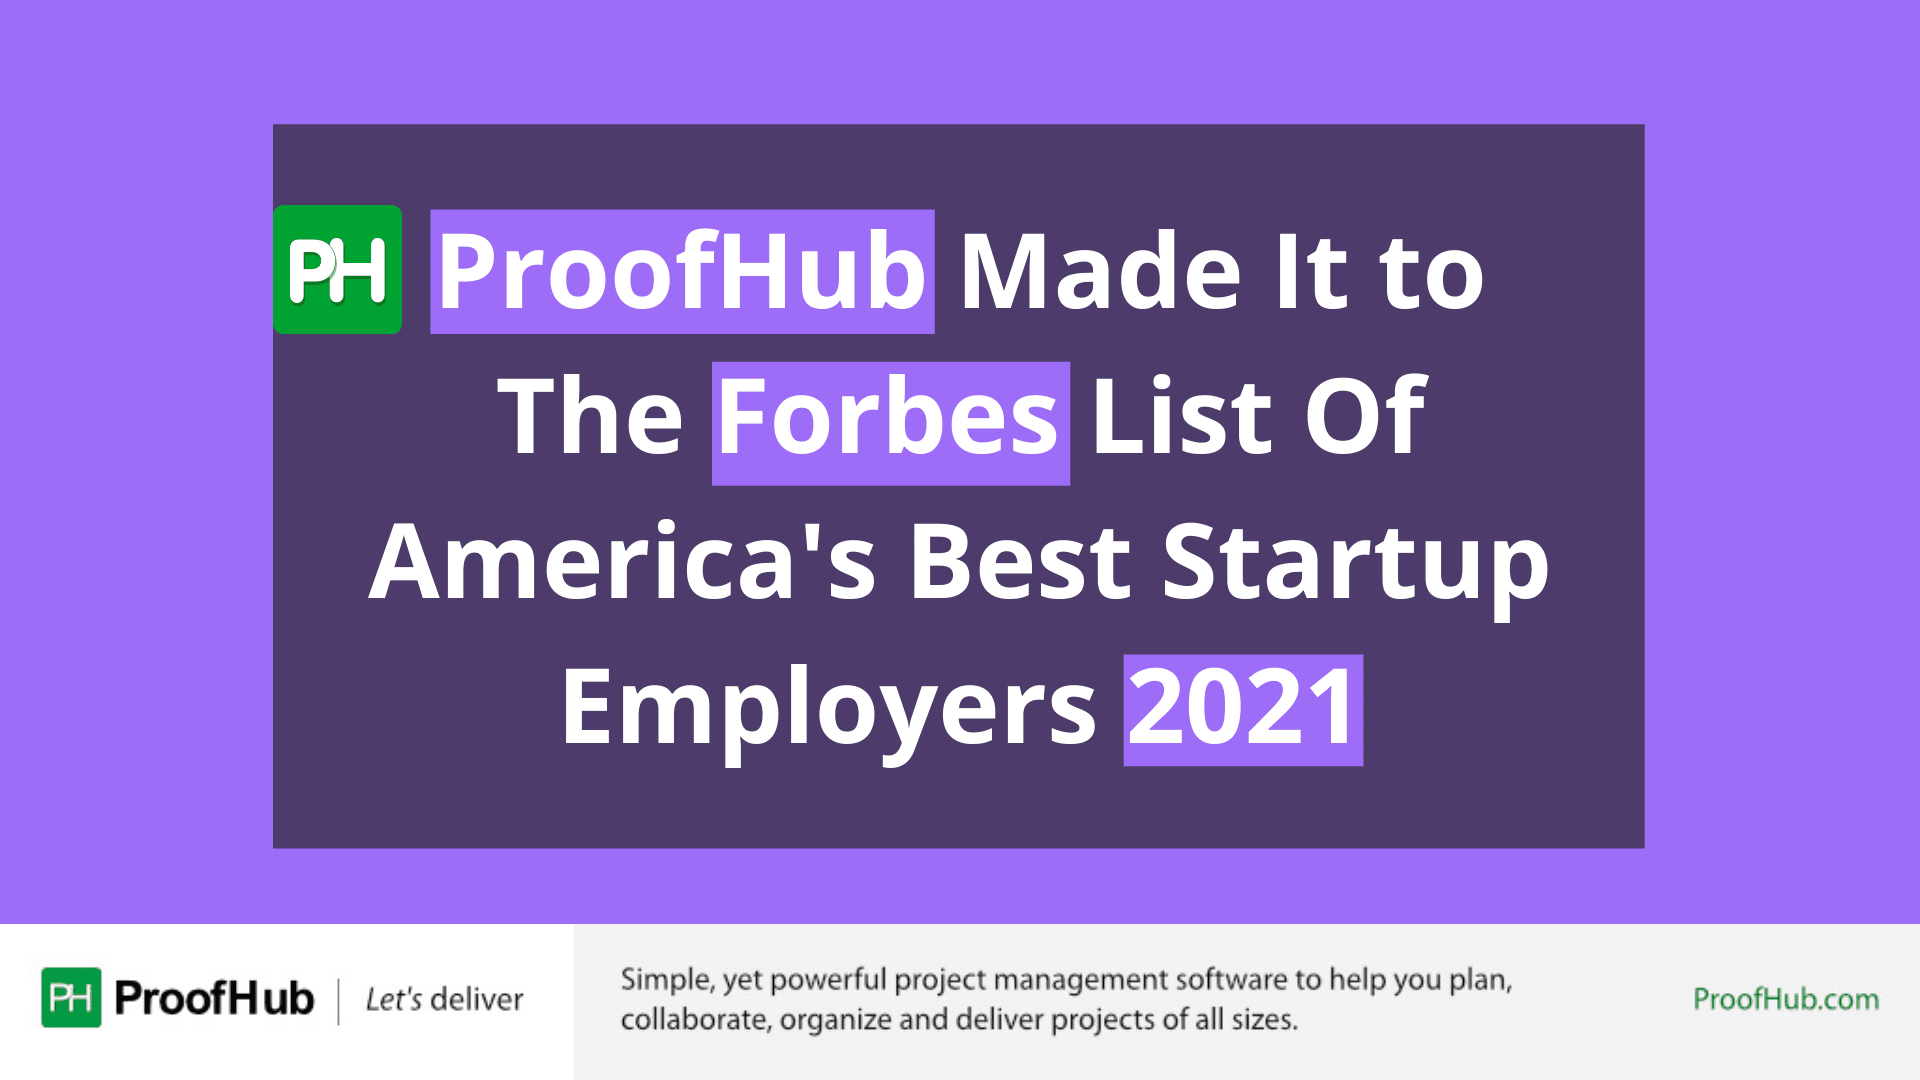 ProofHub Made It to The Forbes List Of America's Best Startup Employers 2021